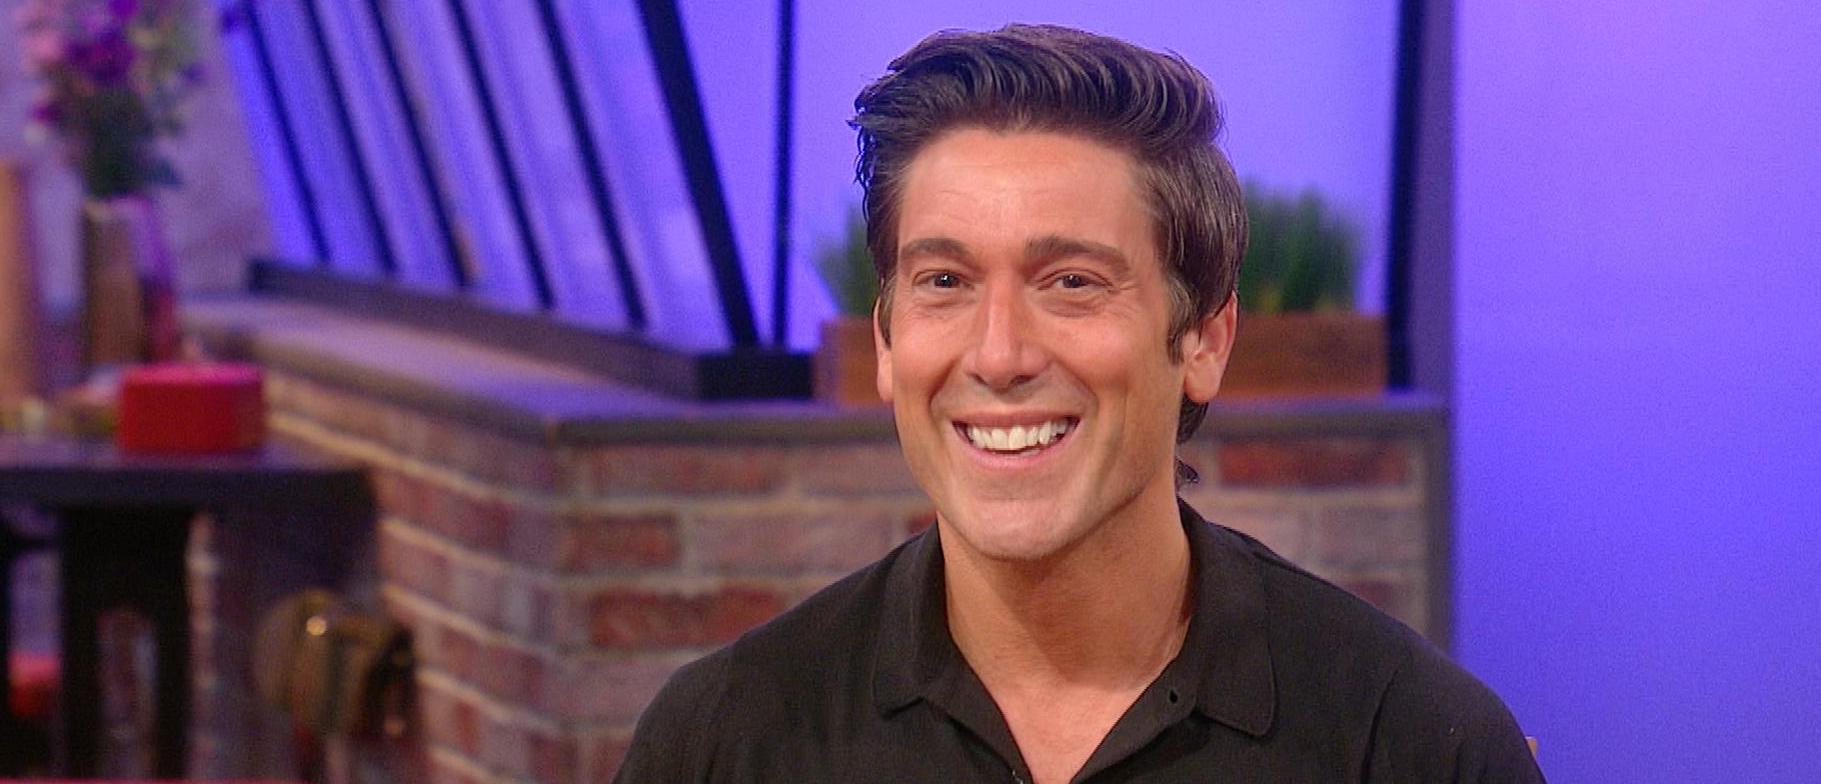 David Muir is an American journalist renowned for his accurate and thought-...